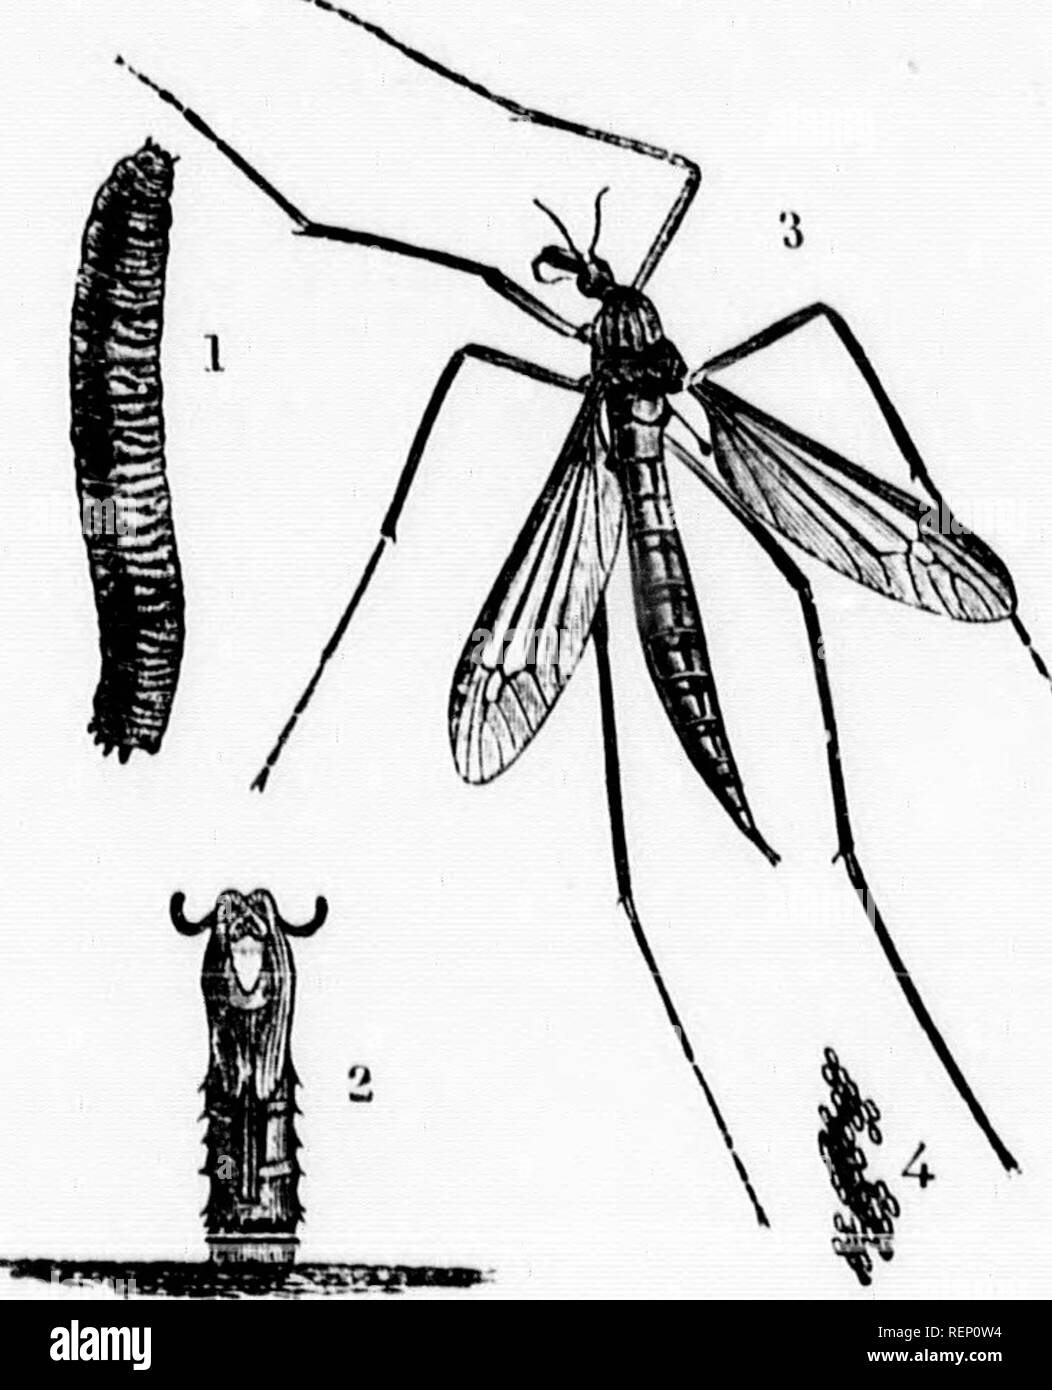 . A manual of injurious insects [microform] : with methods of prevention and remedy for their attacks to food crops, forest trees, and fruit : to which is appended a short introduction to entomology. Insect pests; Agricultural pests; Entomology; Insectes nuisibles, Lutte contre les; Ennemis des cultures, Lutte contre les; Entomologie. Various kinds of dipterous Plies (see pp. 31—34): 1, 6, and 7, larvro ; 2 and 3, pupaj, nat. size and magnified ; 4, 5, 8, and 'J, Flies, magnified, with lines showing nat. size. Wings'Uwo,&quot; membranous; in the place usually occupied by the hind wings arc a p Stock Photo